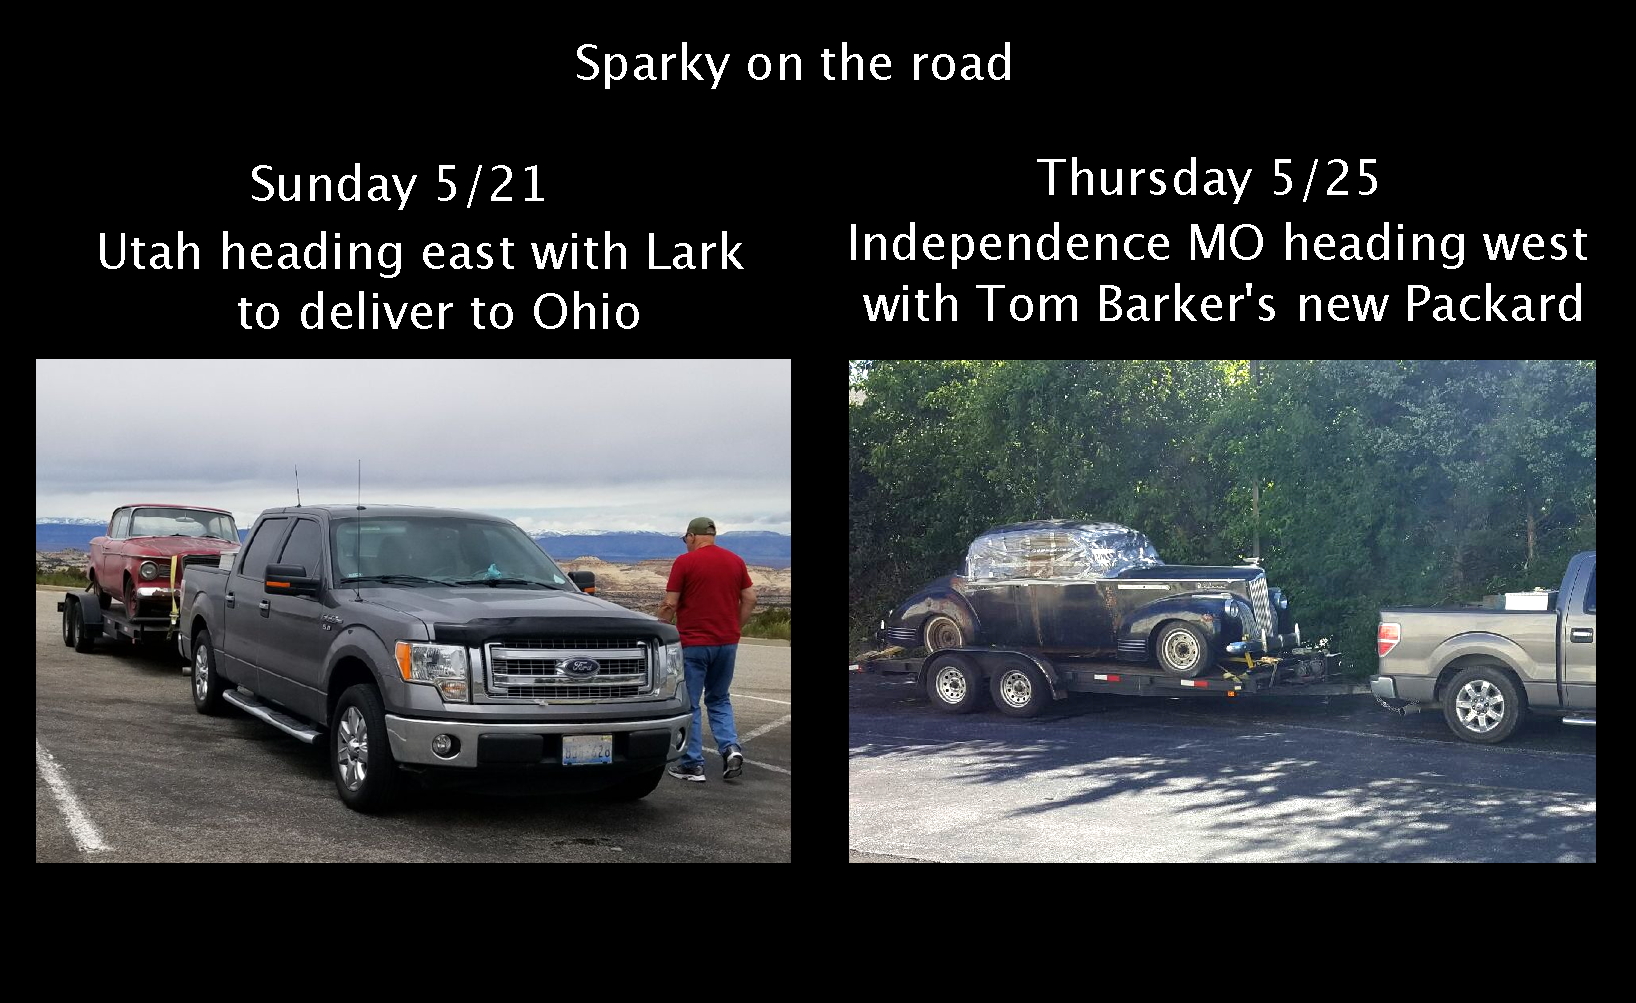 Sparky on the road